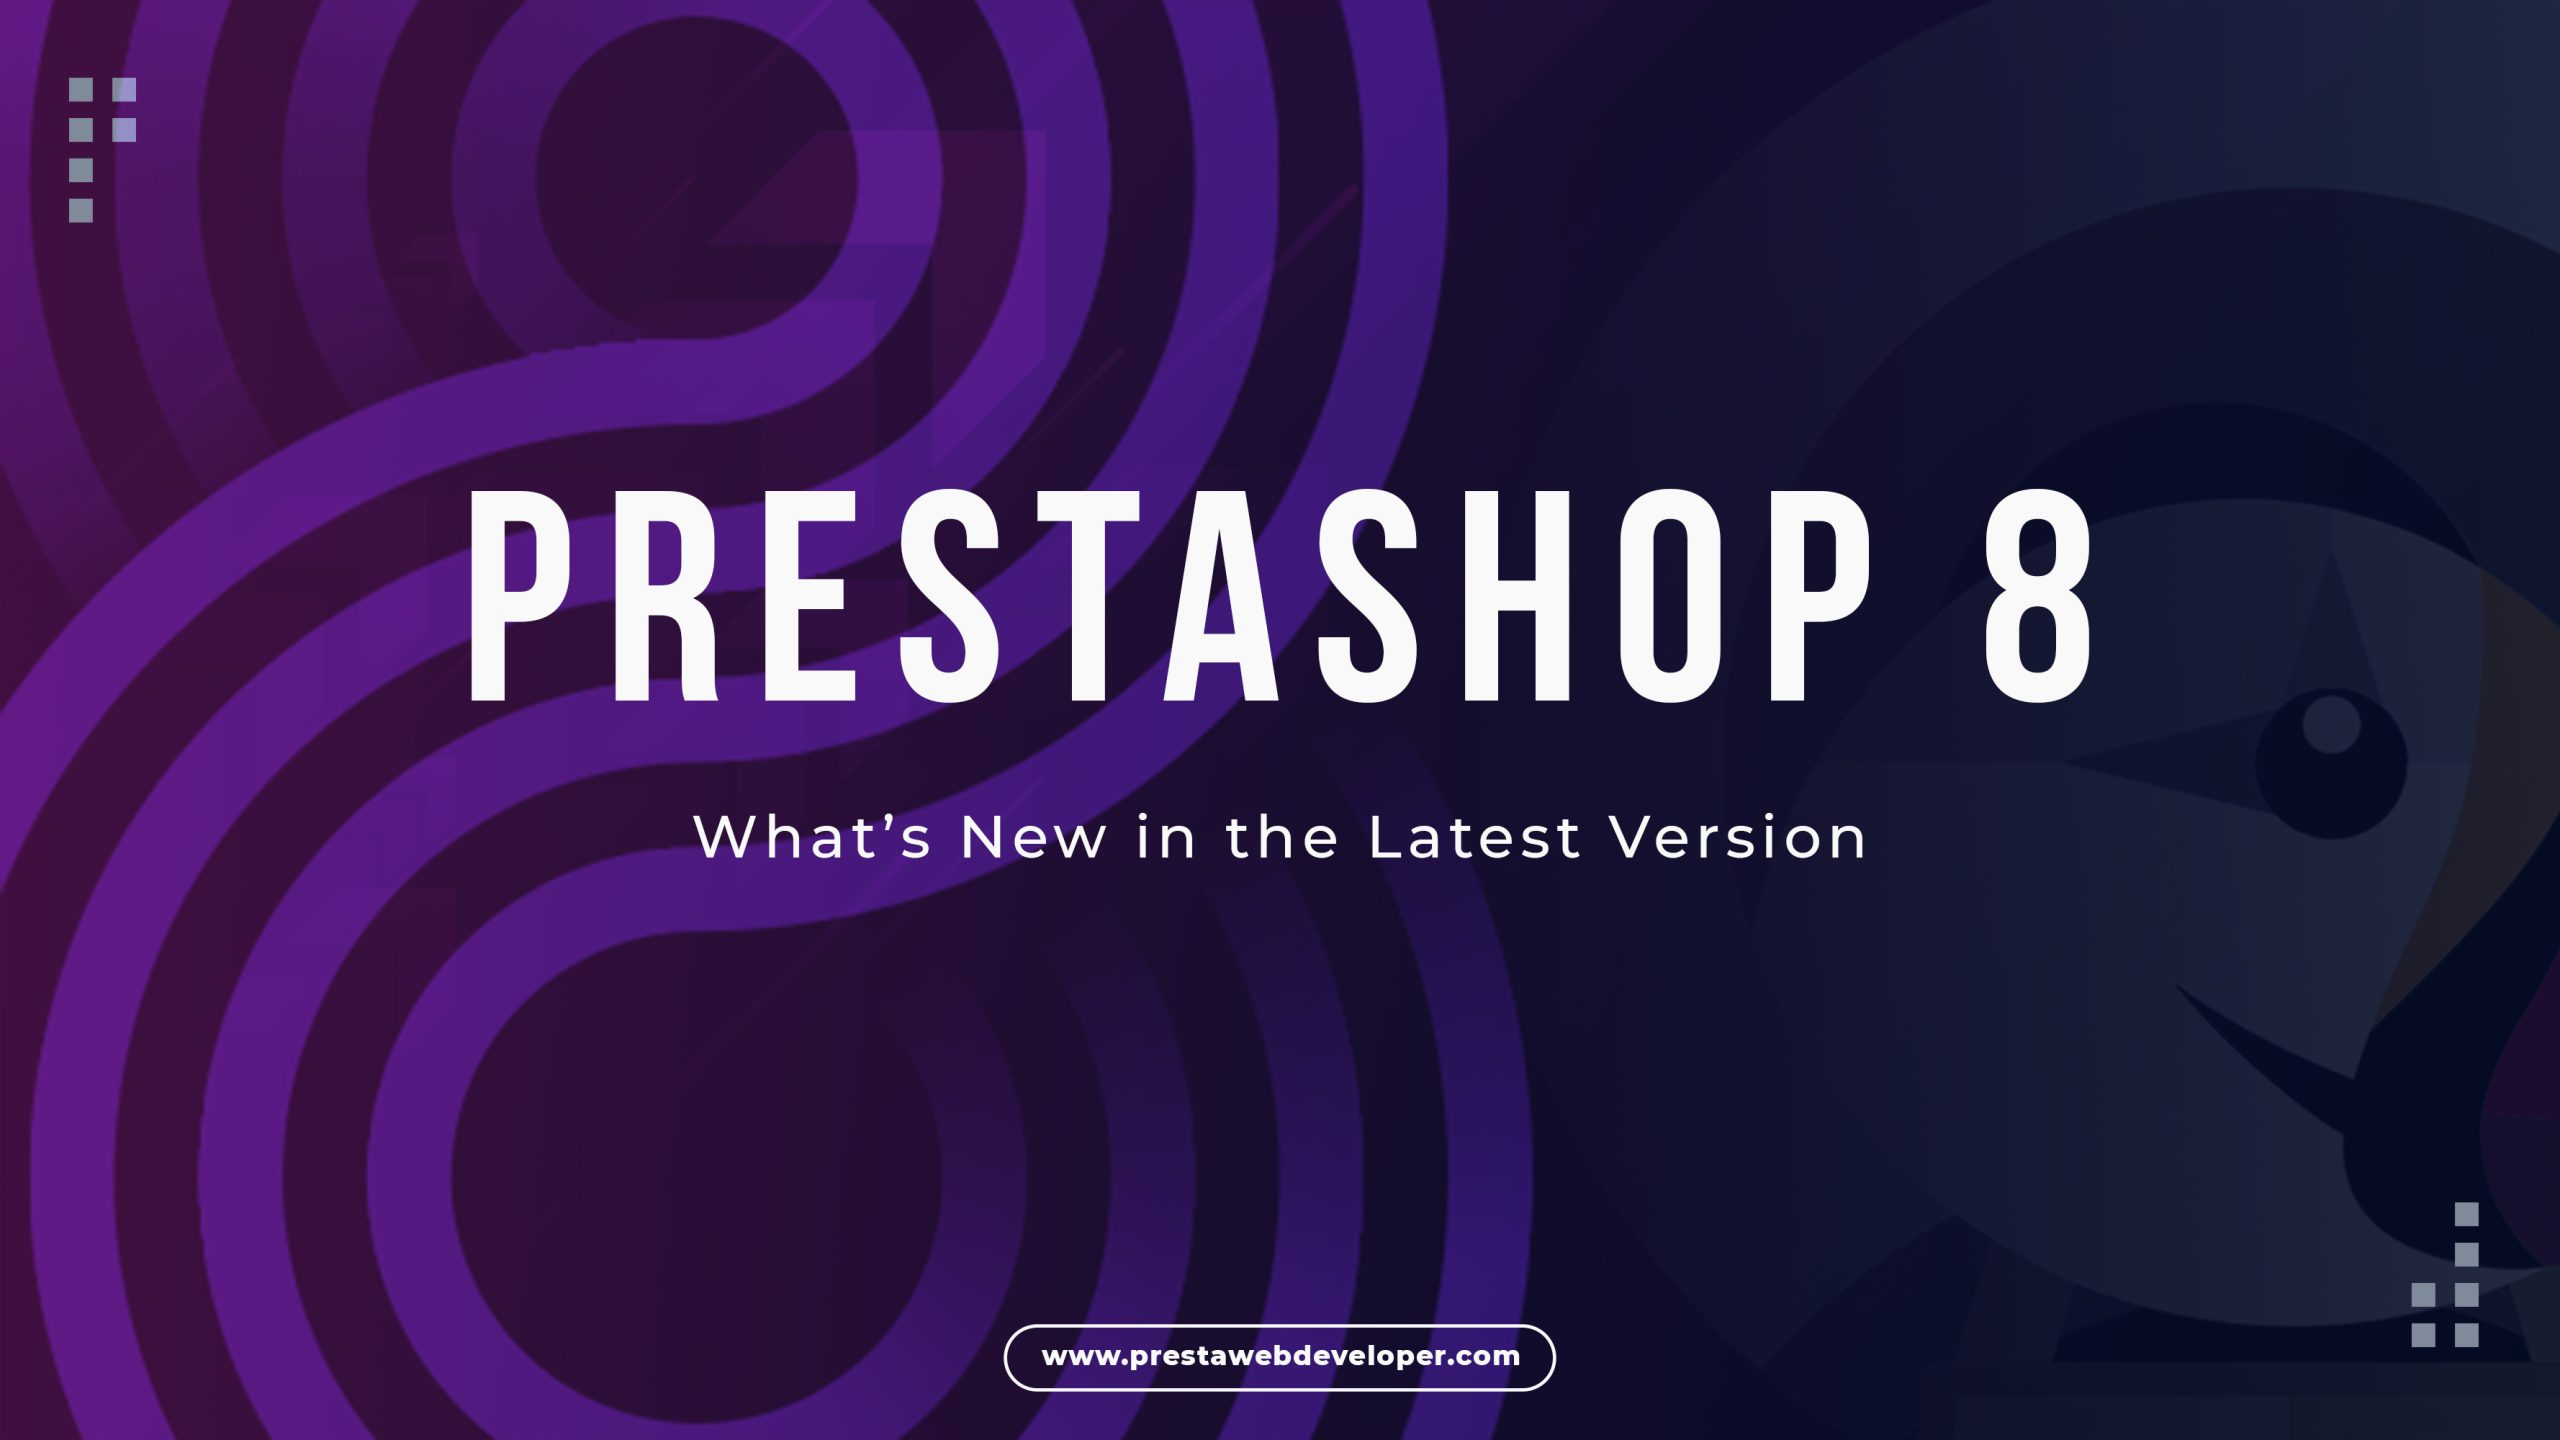 Prestashop 8 – What’s New in the Latest Version